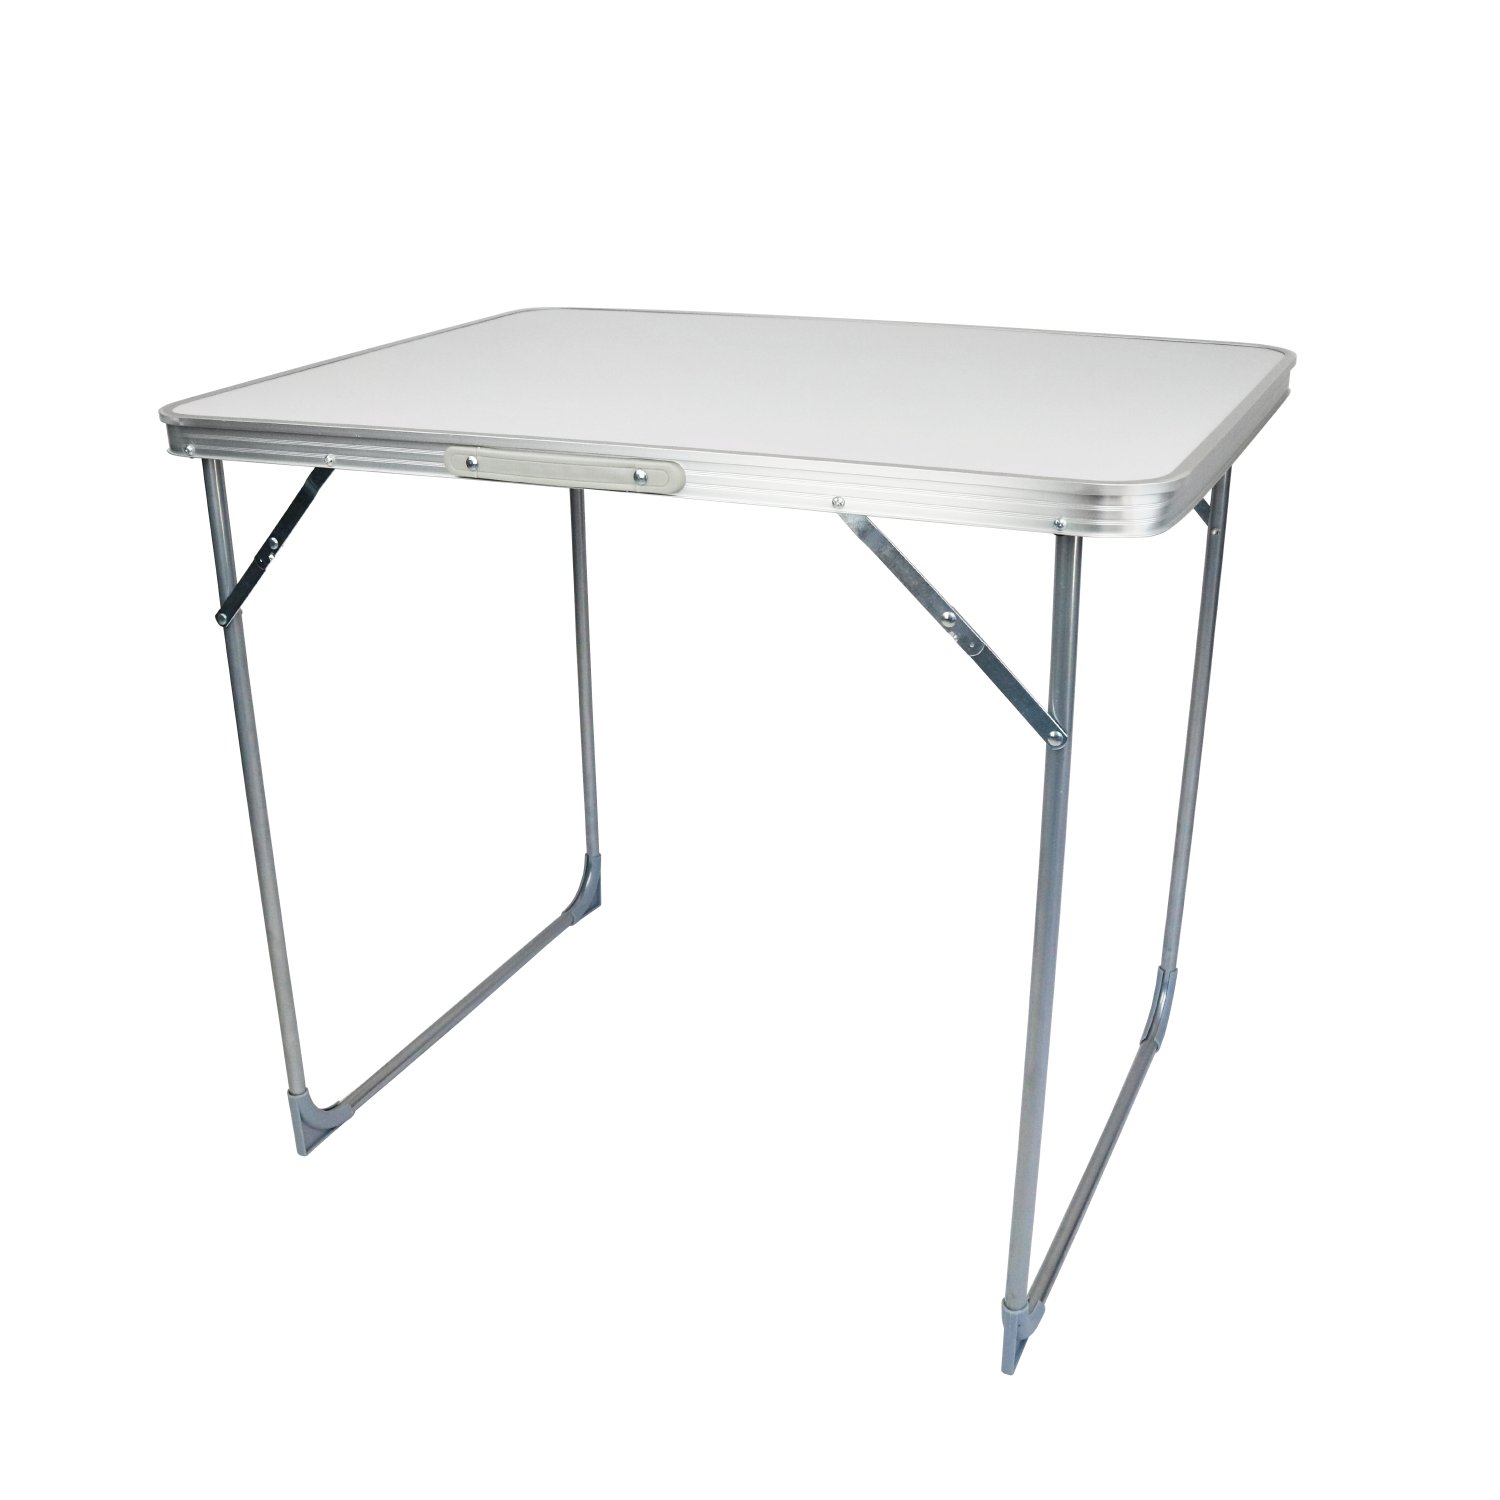 NEW 4ft Folding Outdoor Camping Hobby Kitchen Work Top Table 